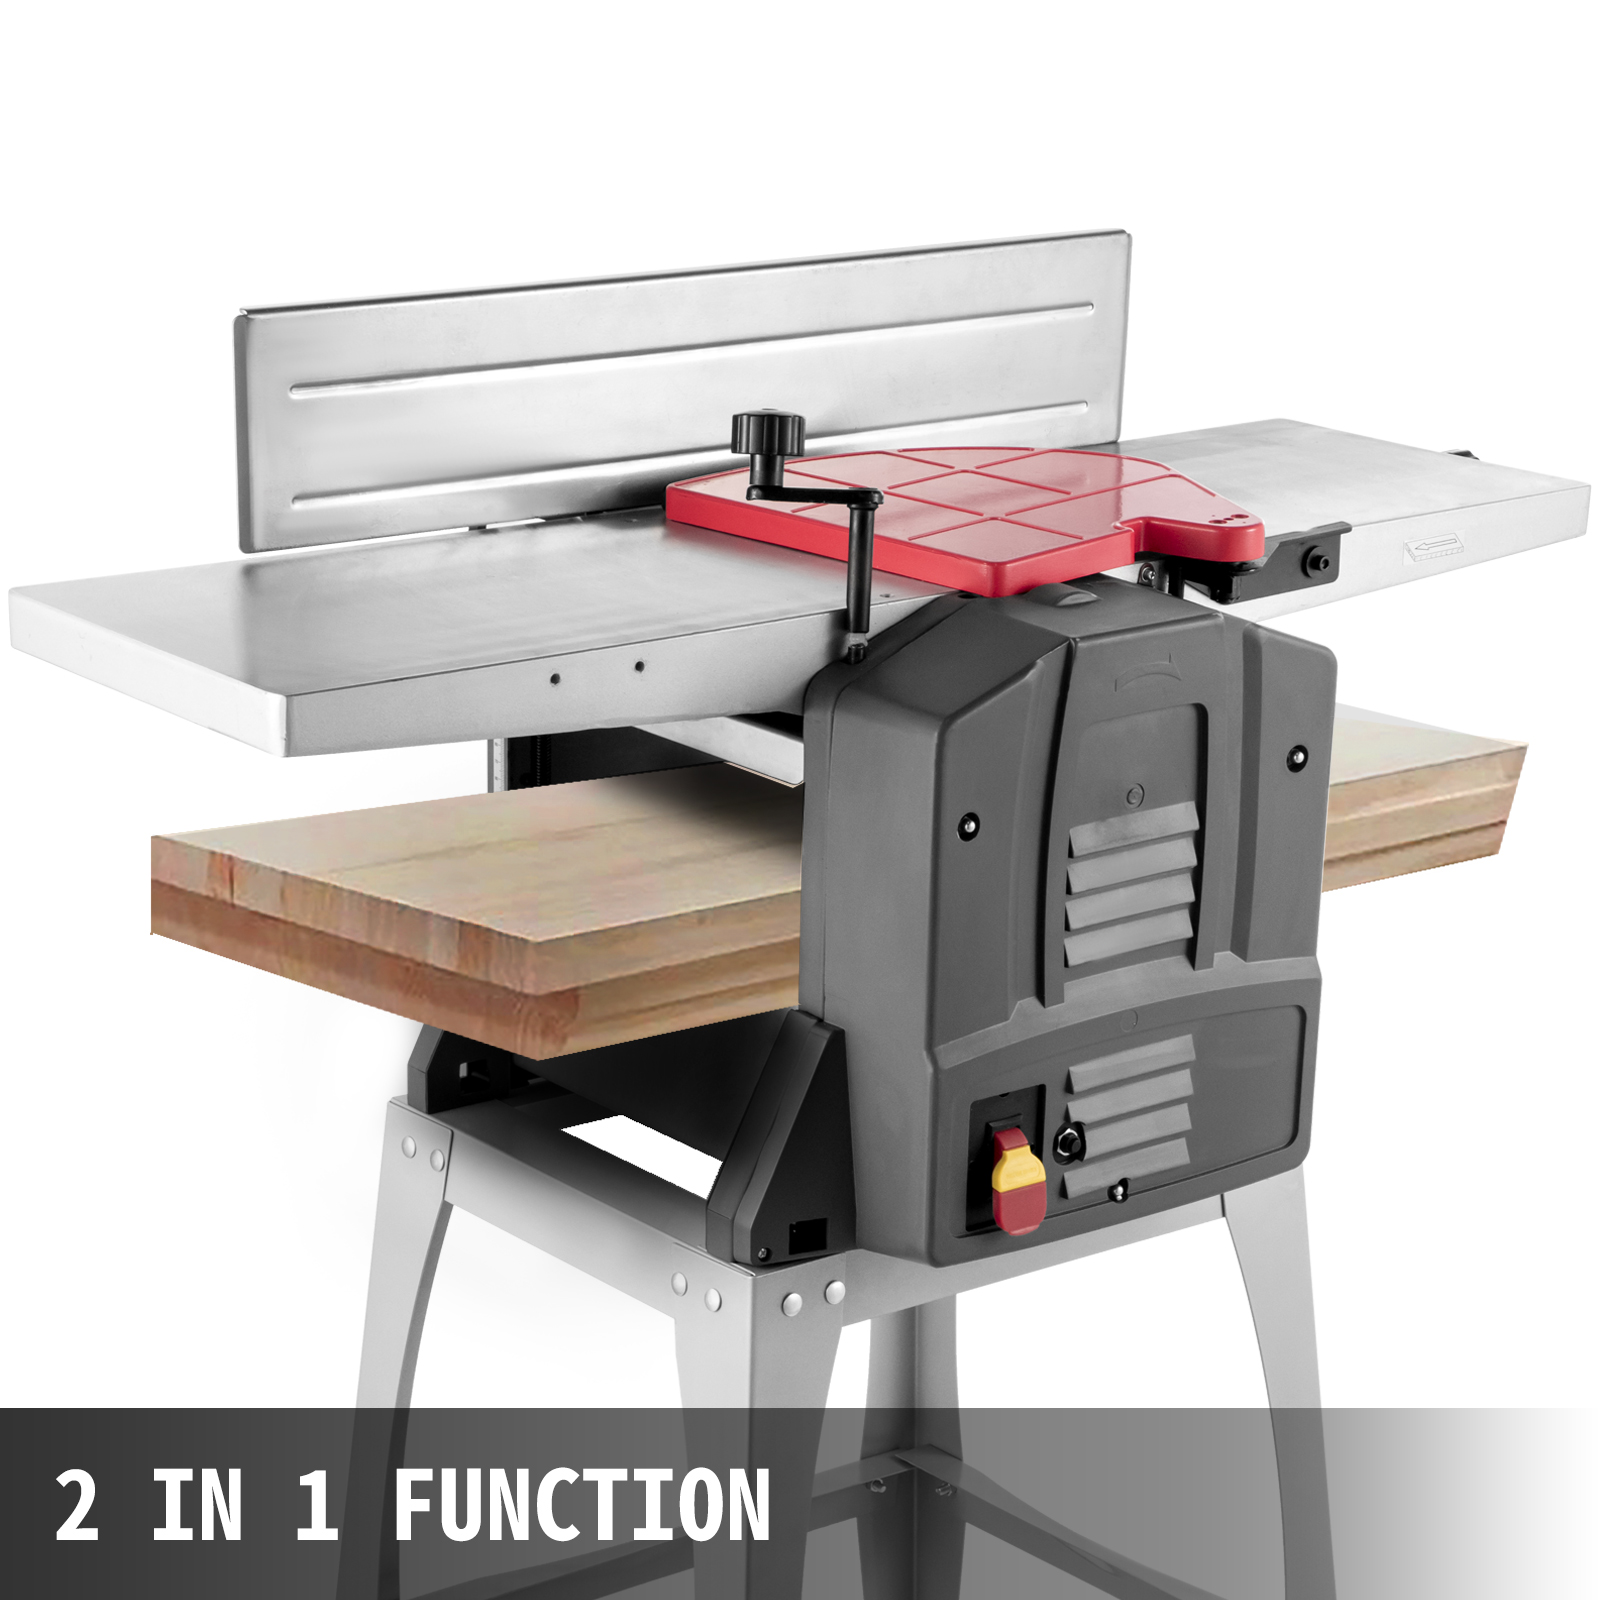 8 Inch Jointers Woodworking Benchtop Jointer Planer for 